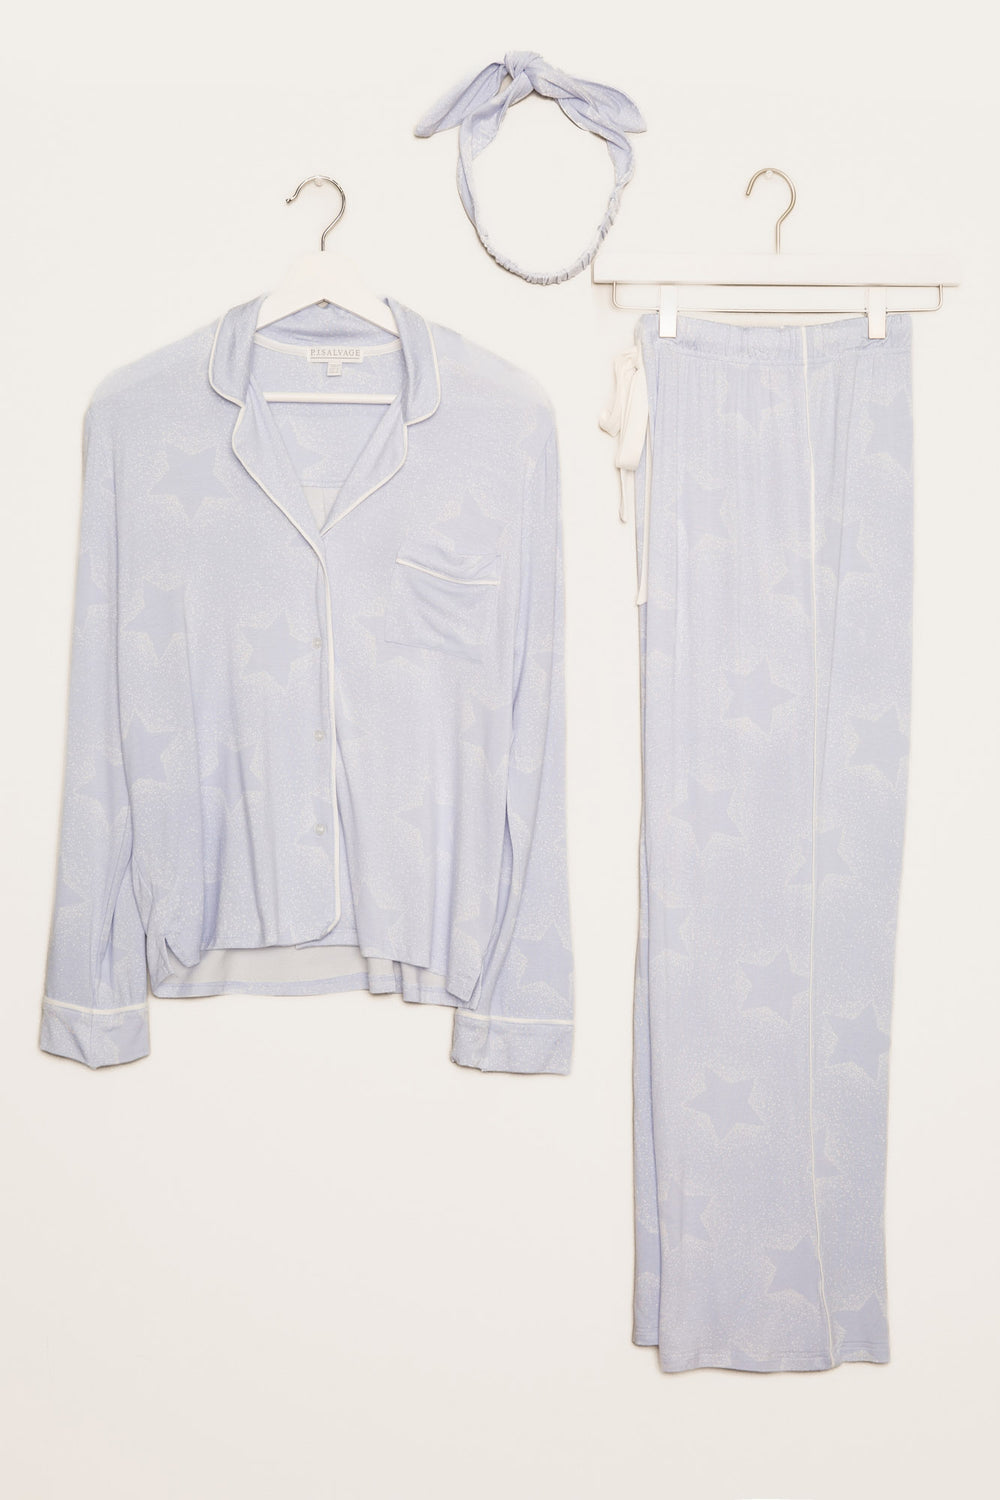 Luxe aloe-infused jersey pj set in blue-ivory star print. Button top & pant with piping & hair wrap. (7257680937060)